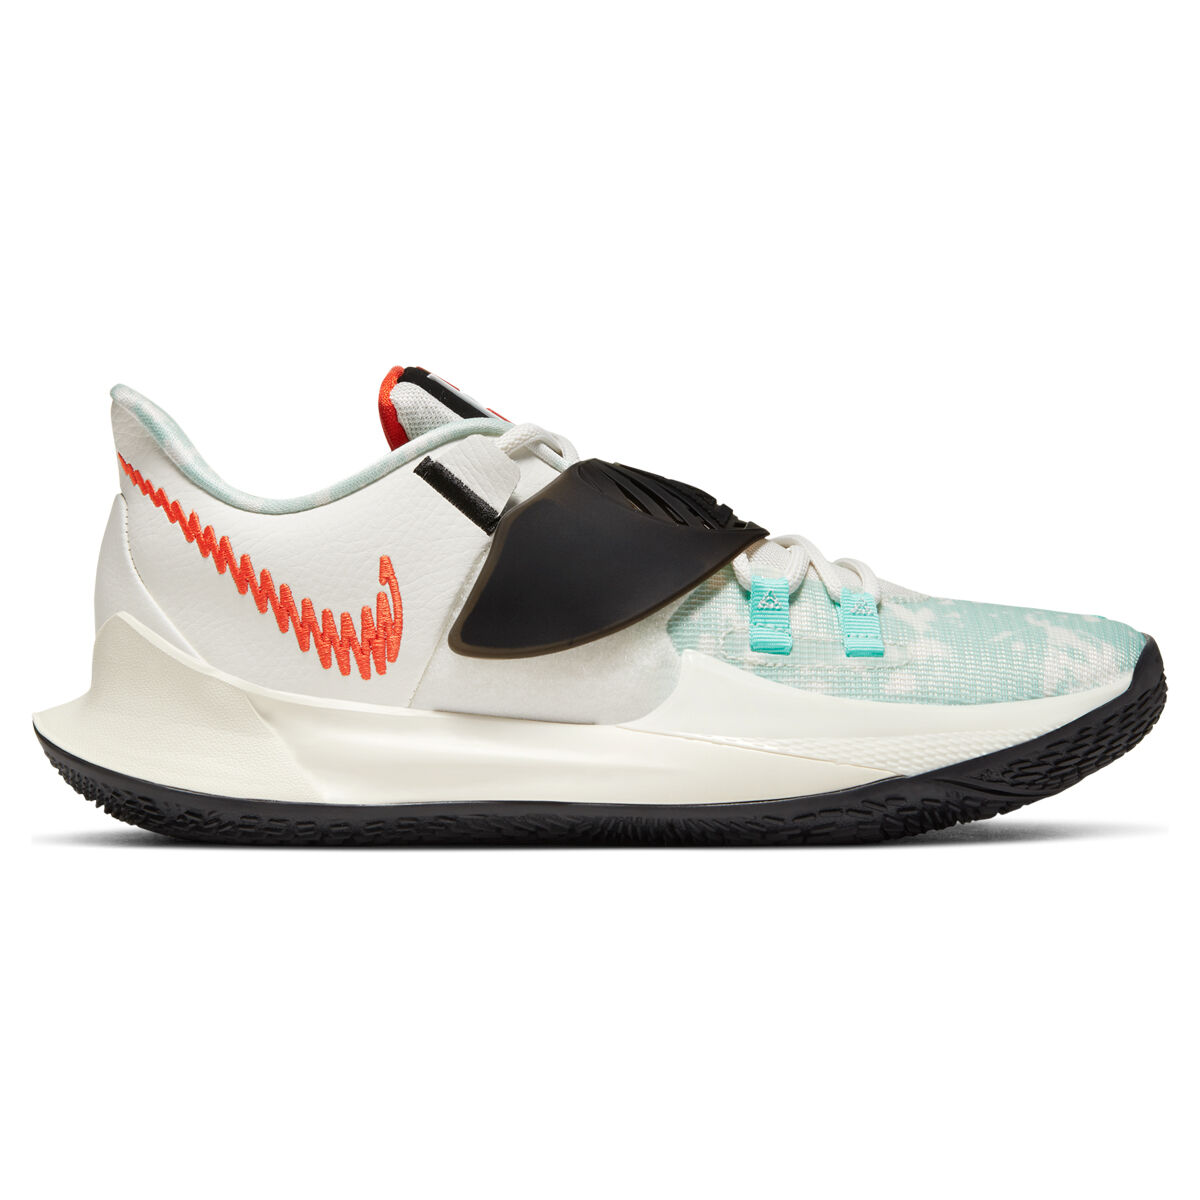 nike kyrie low 3 mens basketball shoes